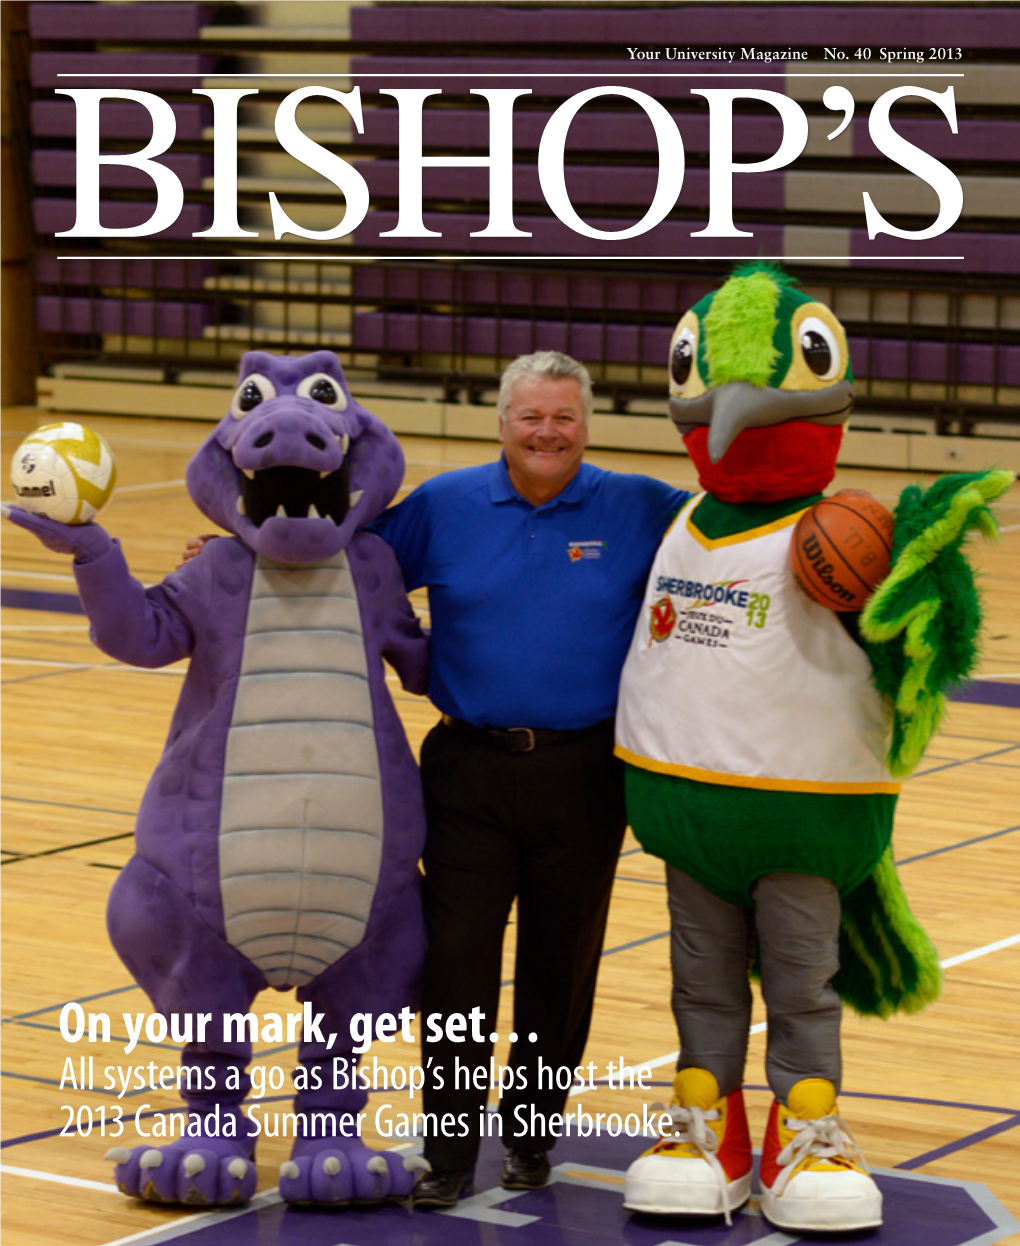 On Your Mark, Get Set… All Systems a Go As Bishop’S Helps Host the 2013 Canada Summer Games in Sherbrooke